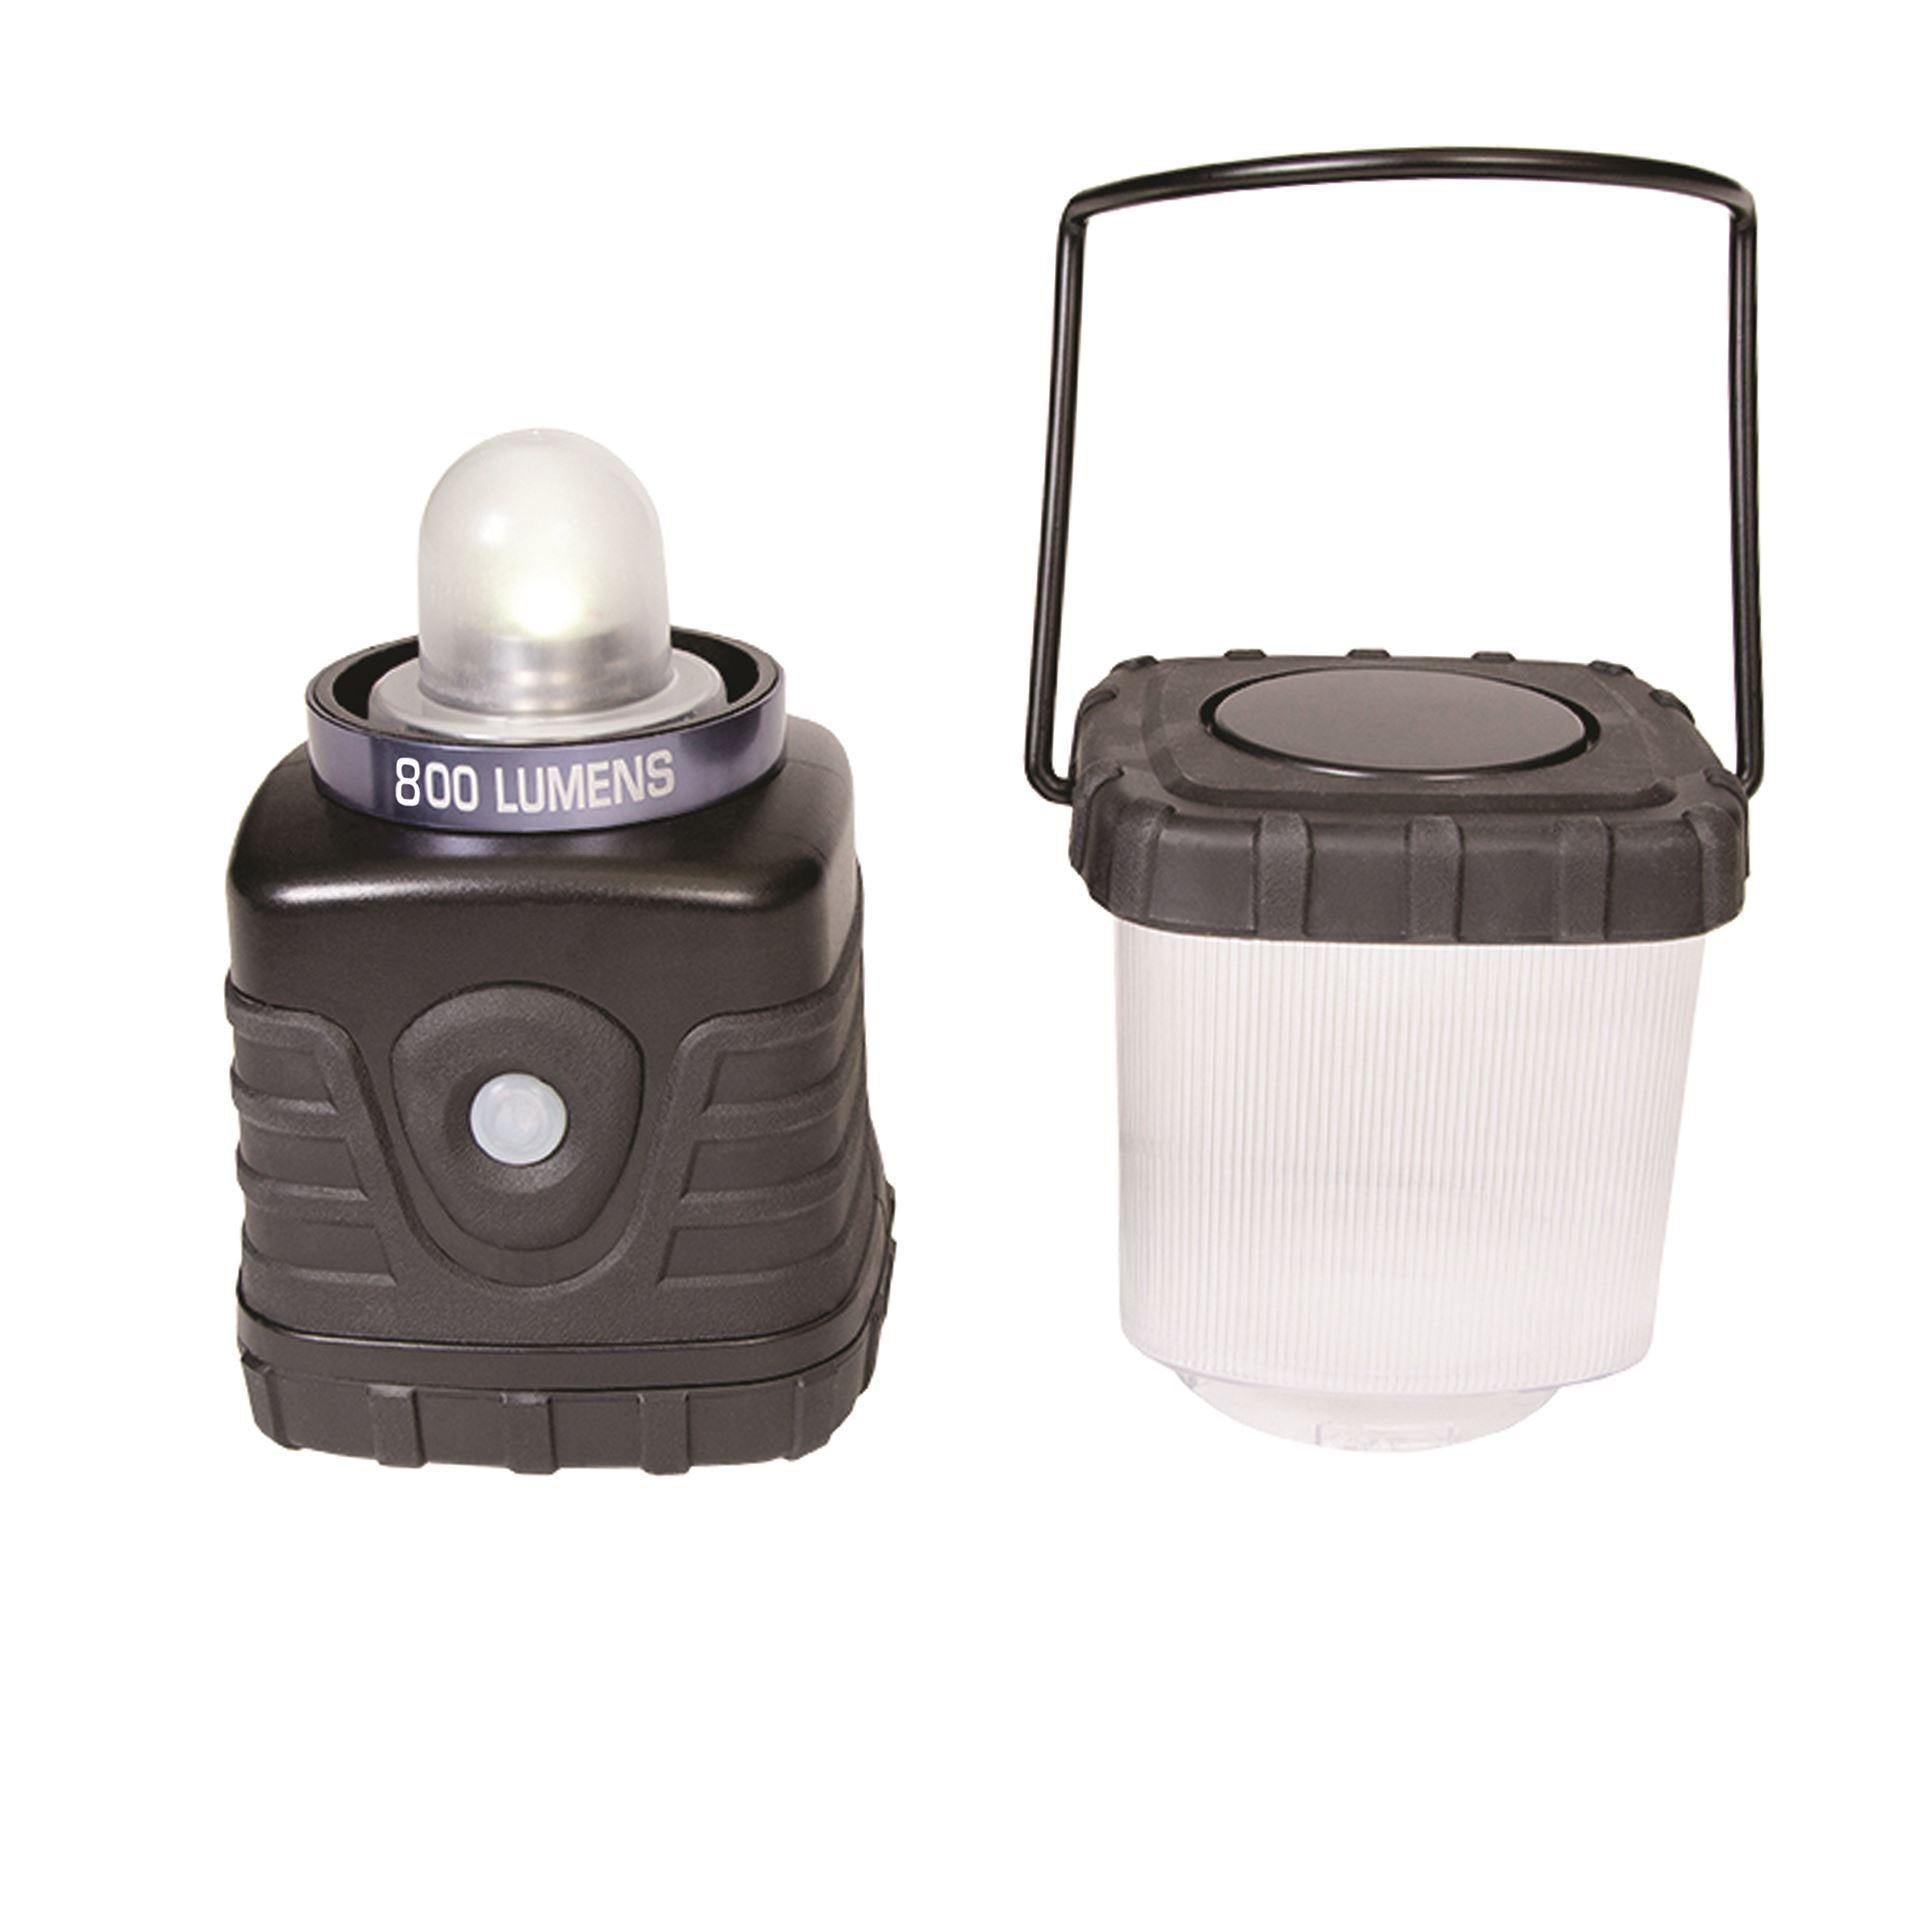 Stansport 800 Lumen Lantern With SMD Bulb - Leapfrog Outdoor Sports and Apparel